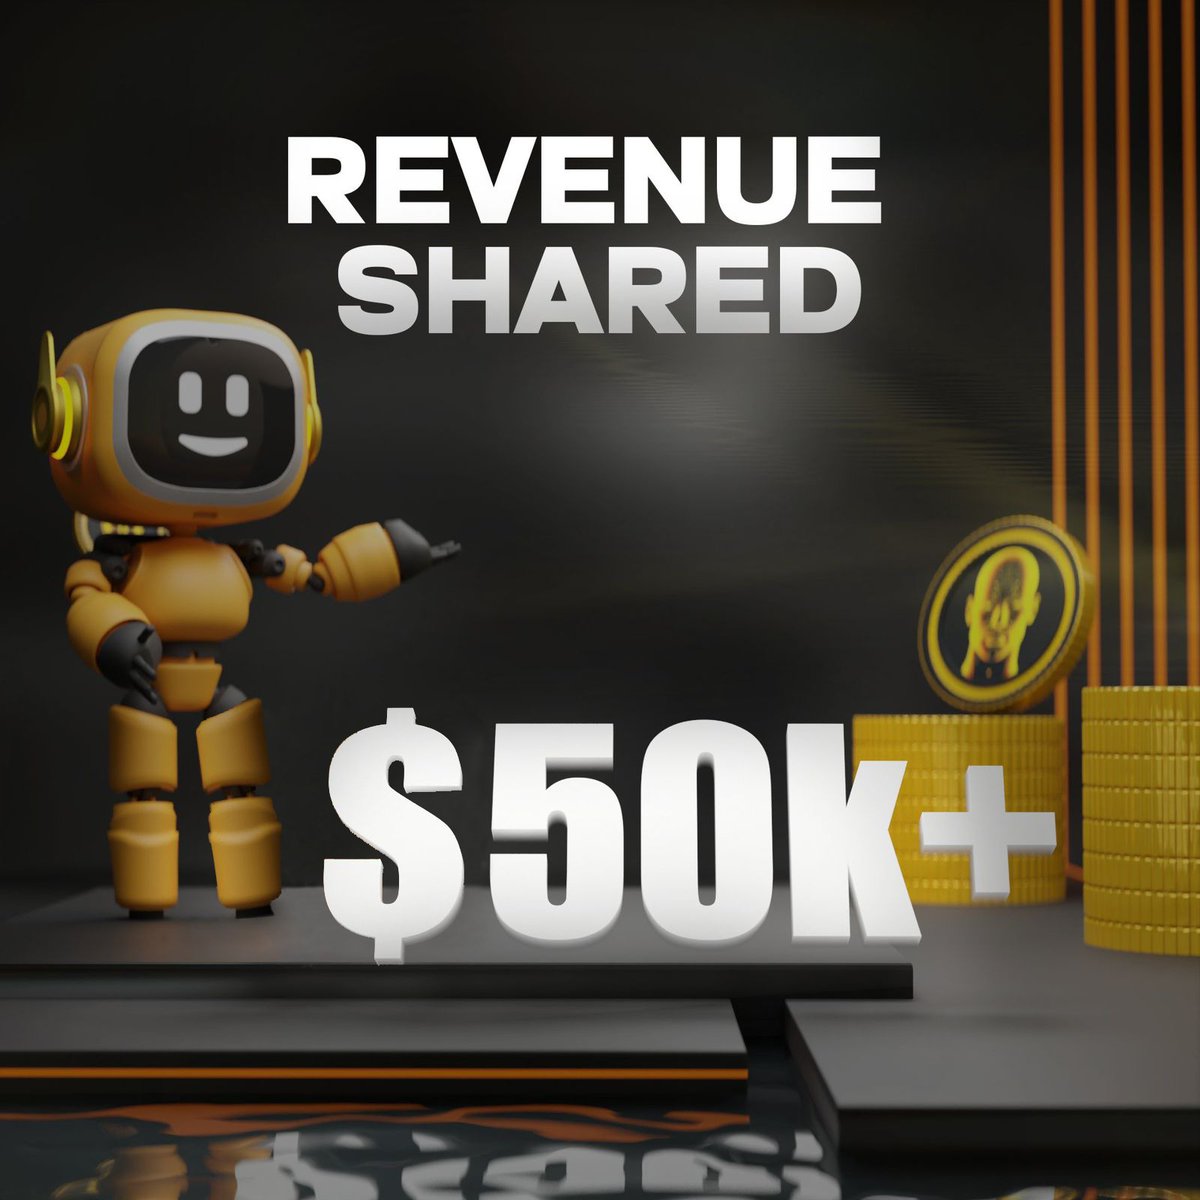 🚀 Our second revenue share totals $50K in rewards (a mix of ETH and $TYPE tokens) across all pools, generated from our last month's revenue! 📈

Starting now, we will shift to quarterly payouts, providing:

- Larger, more impactful rewards.
- Enhanced marketing efforts,